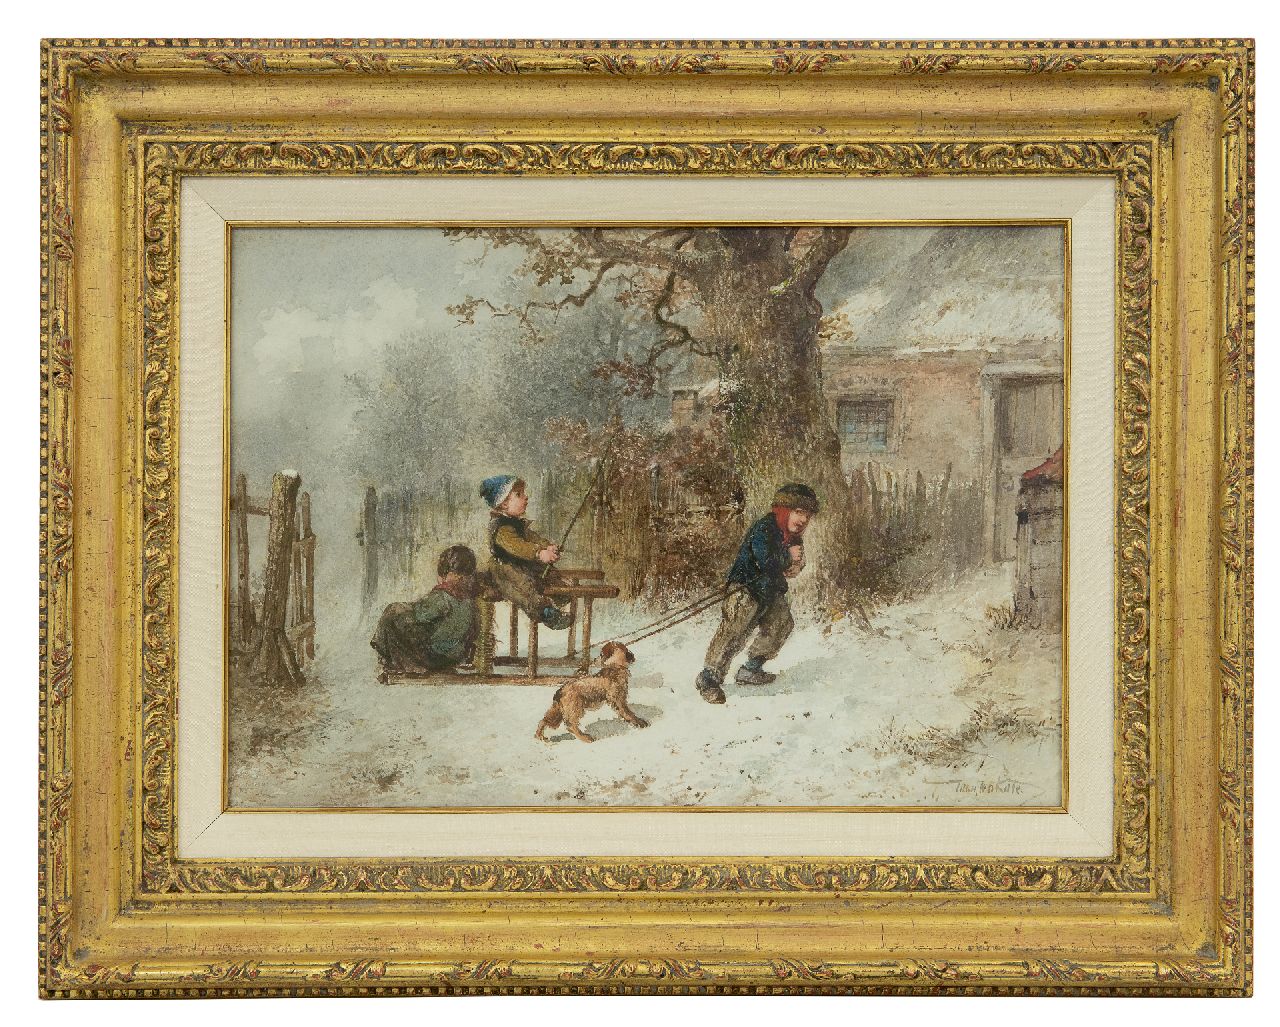 Kate J.M.H. ten | Johan 'Mari' Henri ten Kate | Watercolours and drawings offered for sale | Playing horse and carriage in the snow, watercolour on paper 25.1 x 35.6 cm, signed l.r.